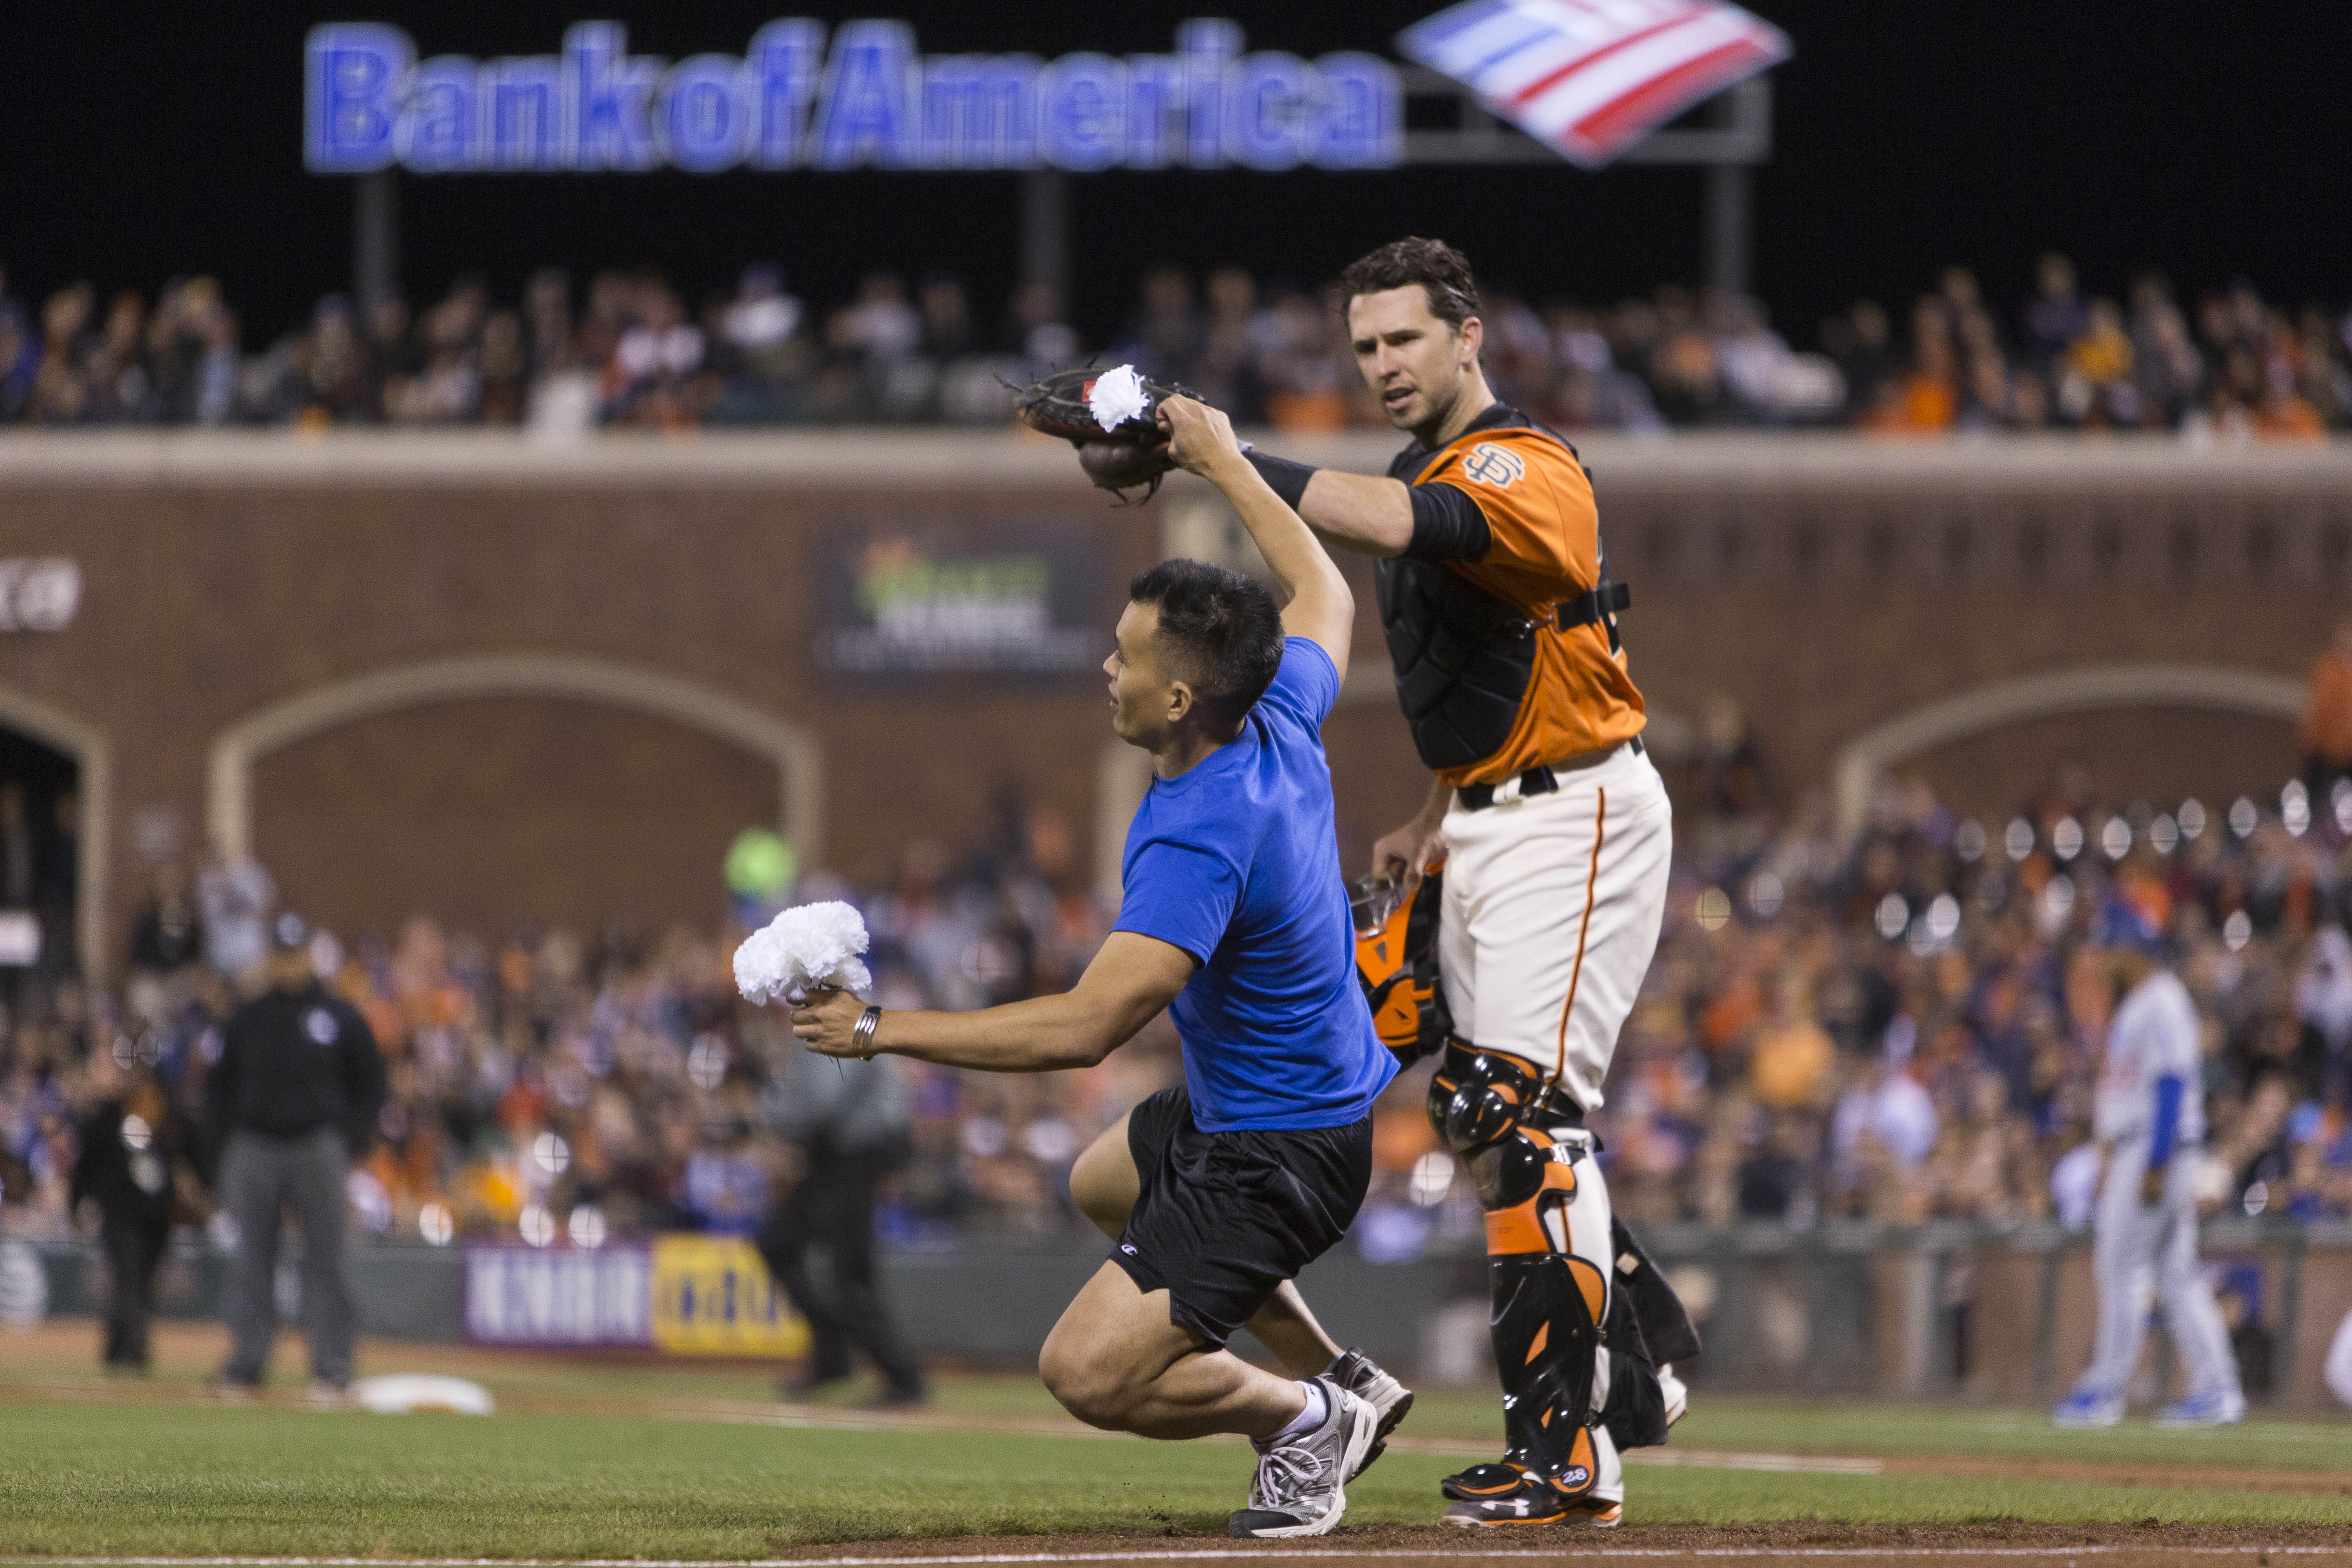 Sep 30, 2016; San Francisco, CA, USA;  San Francisco Giants catcher Buster Posey (28) pushes a fan away during the fourth inning against the Los Angeles Dodgers  at AT&T Park. Mandatory Credit: Neville E. Guard-USA TODAY Sports ORG XMIT: USATSI-263050 ORIG FILE ID:  20160930_lbm_gb9_190.JPG